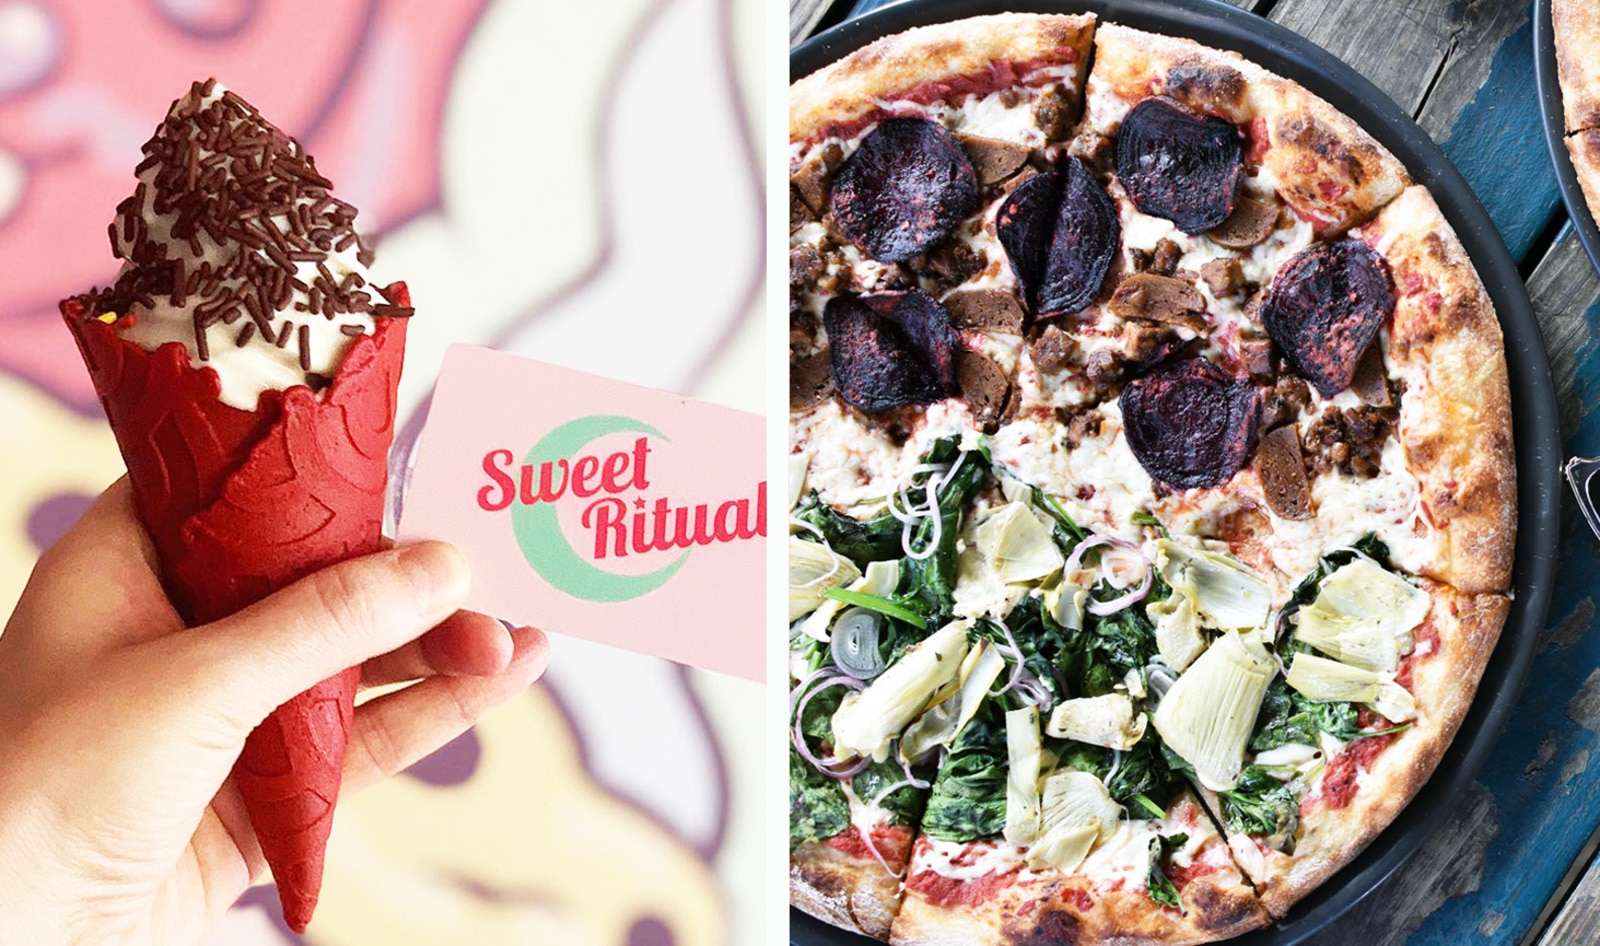 A Vegan Ice Cream Pizza Parlor Is Opening in Austin